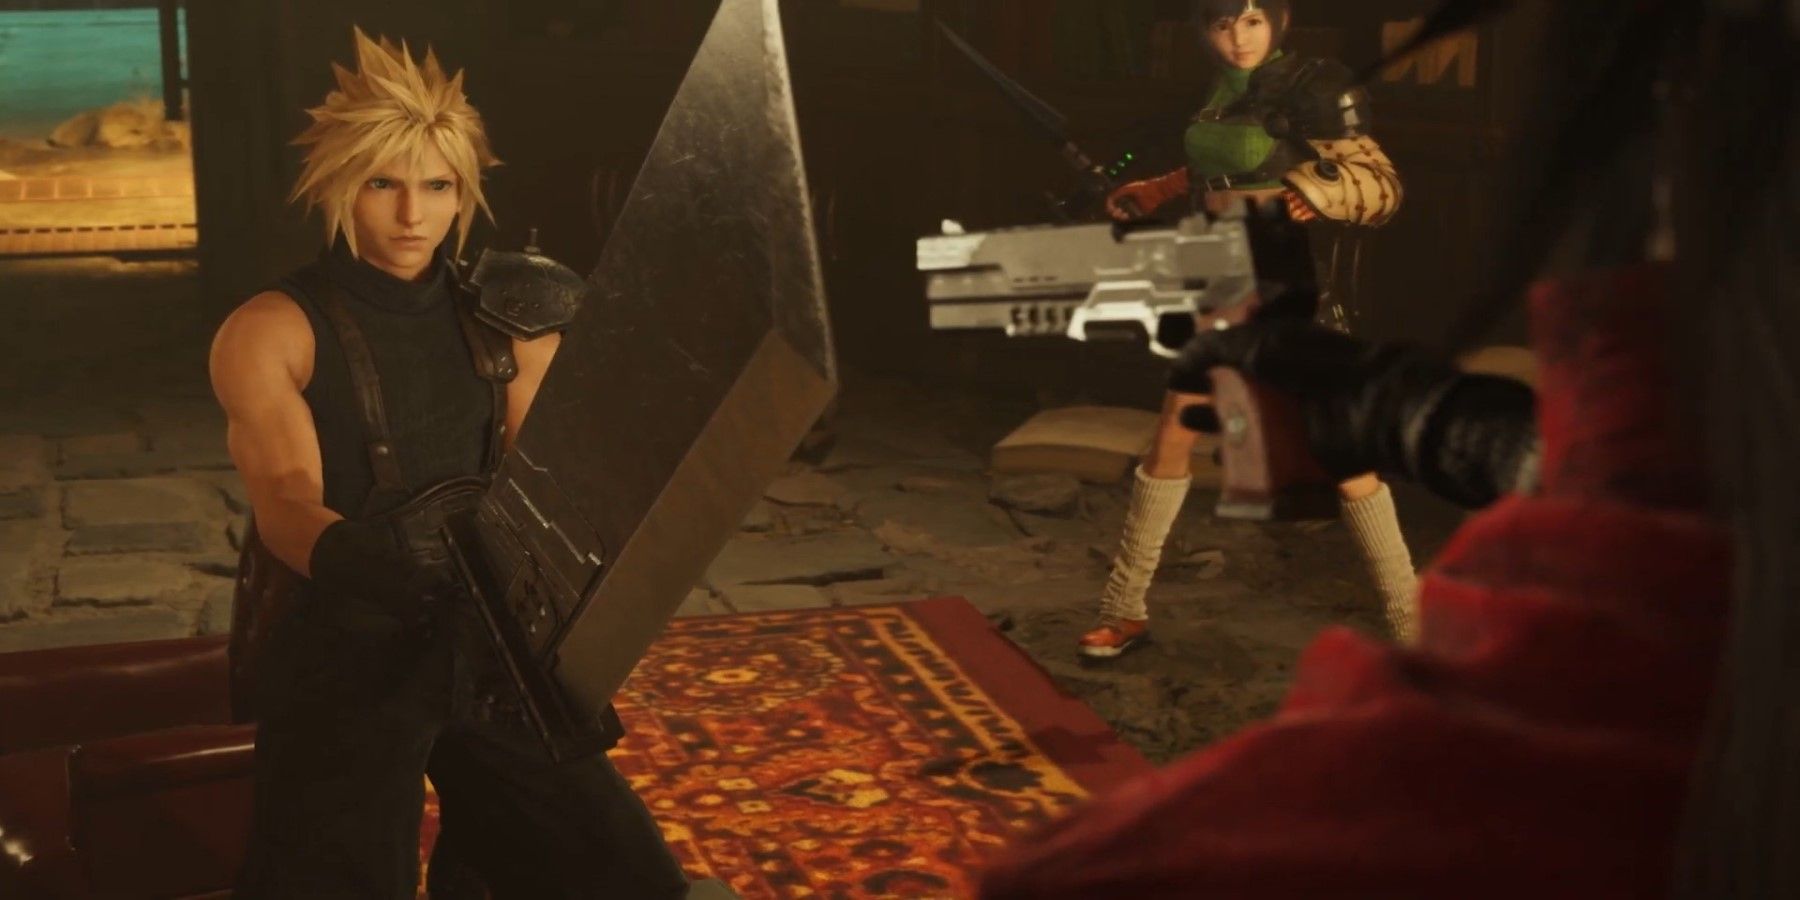 Final Fantasy 7 Rebirth release date, gameplay and trailers